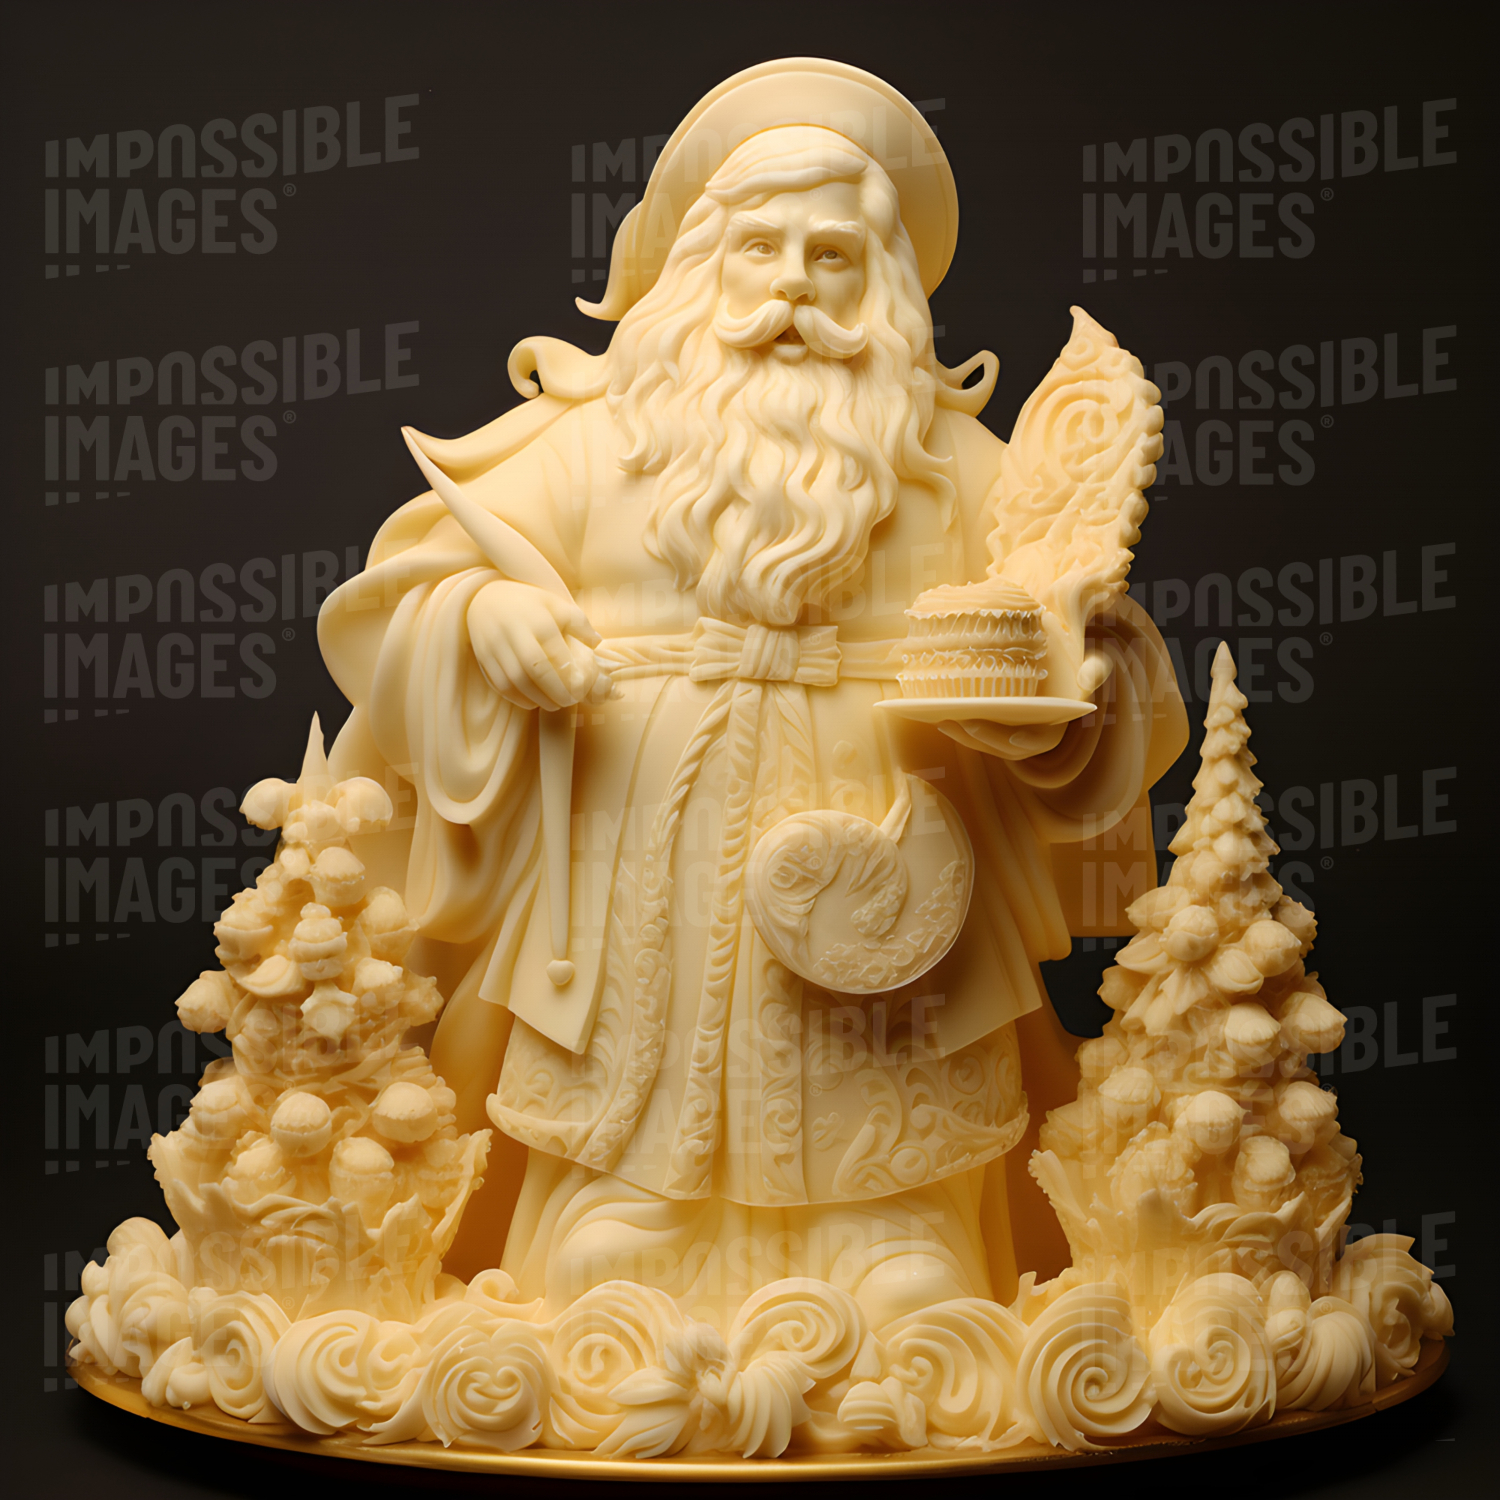 Santa carved from butter -  Santa Claus, carved from a block of butter, stands tall in the center of the room. His jolly face and rosy cheeks bring a smile to all who see him.